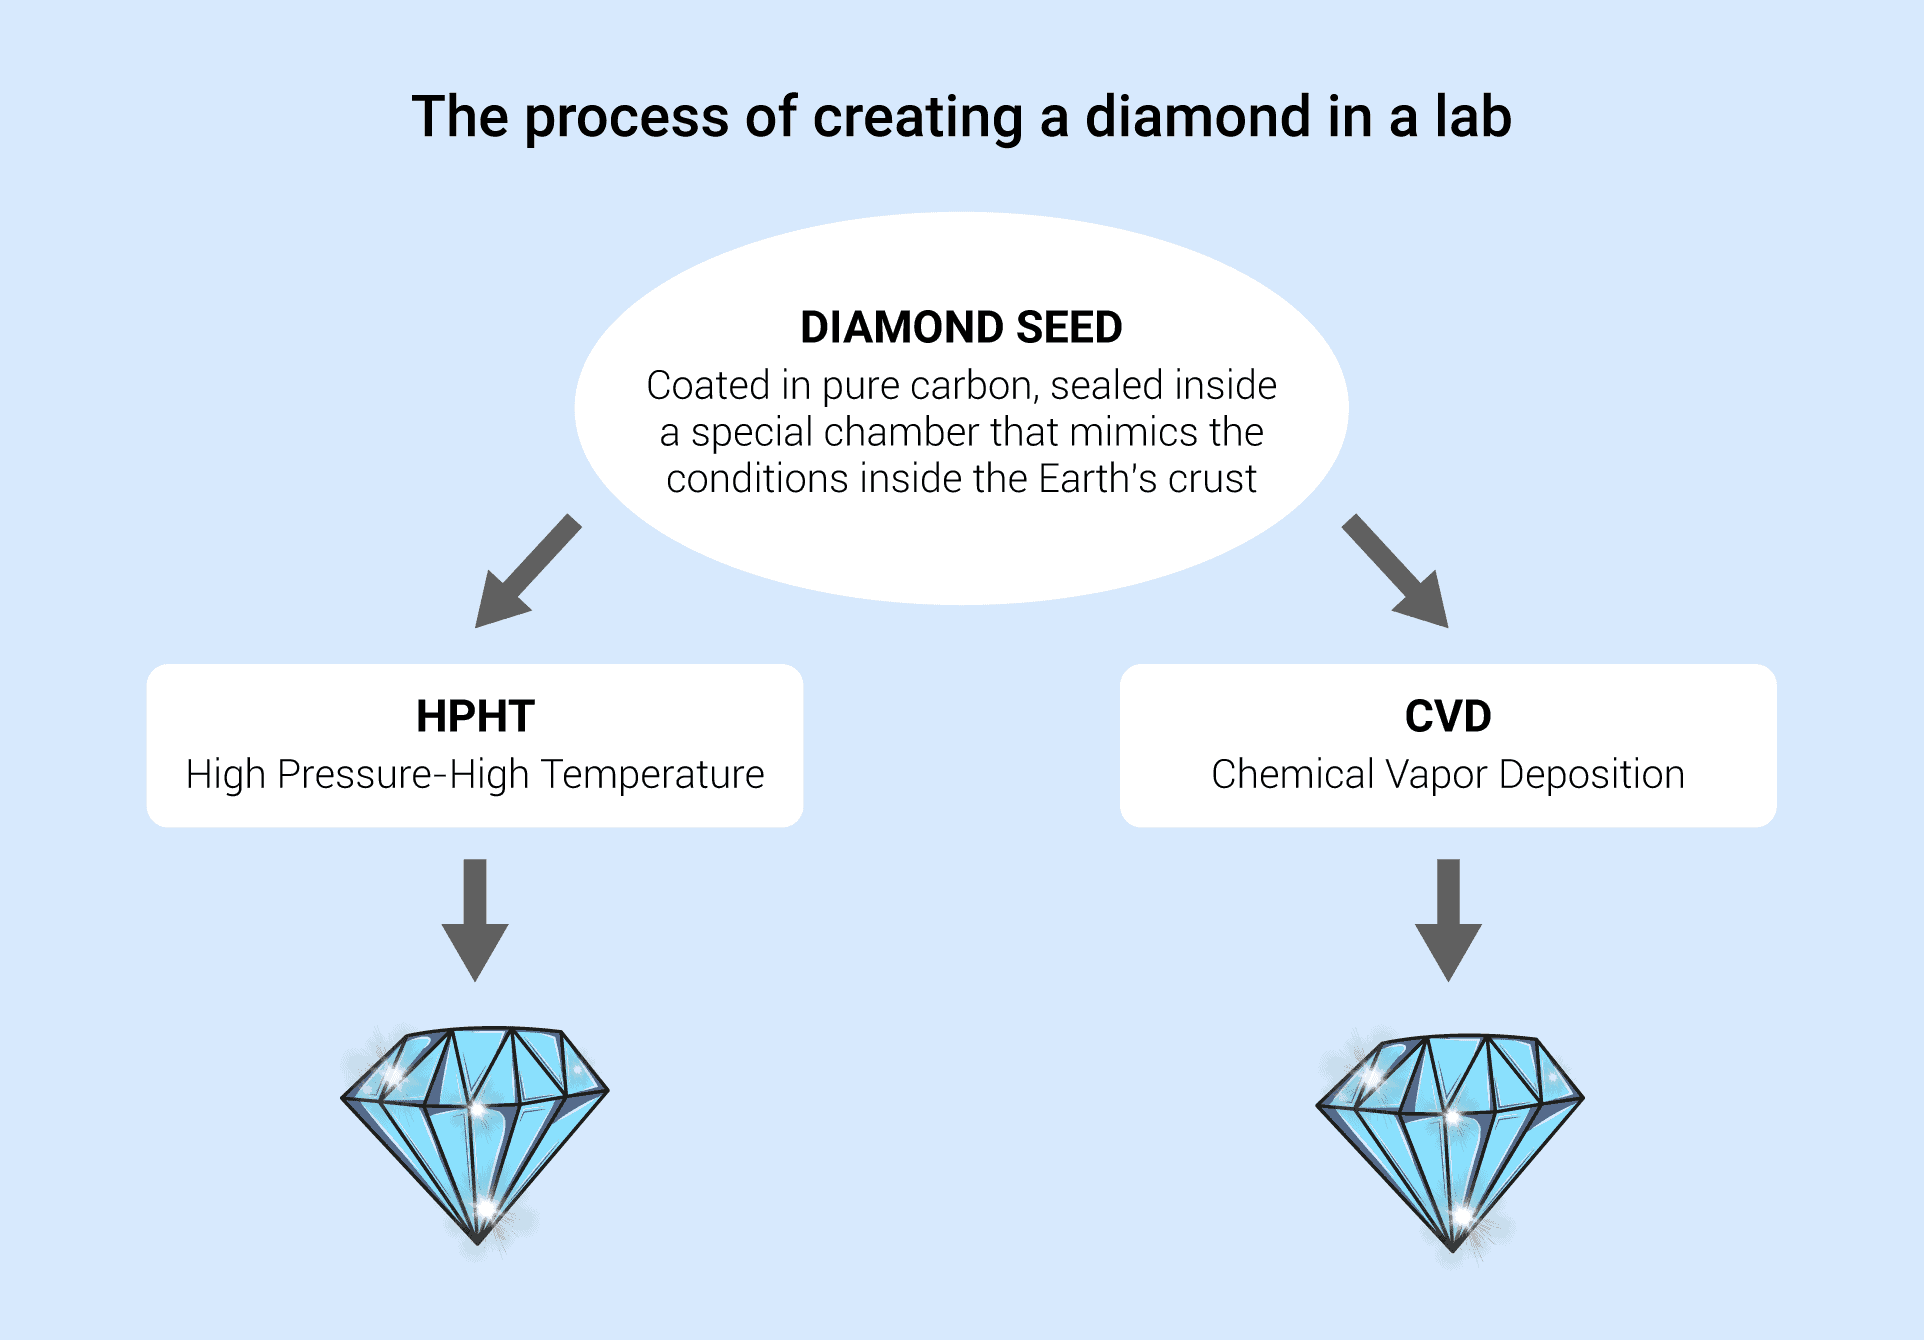  A Complete Guide to Lab-Grown Diamonds The Diamond Pro https://www.diamonds.pro › education › lab-created-dia...